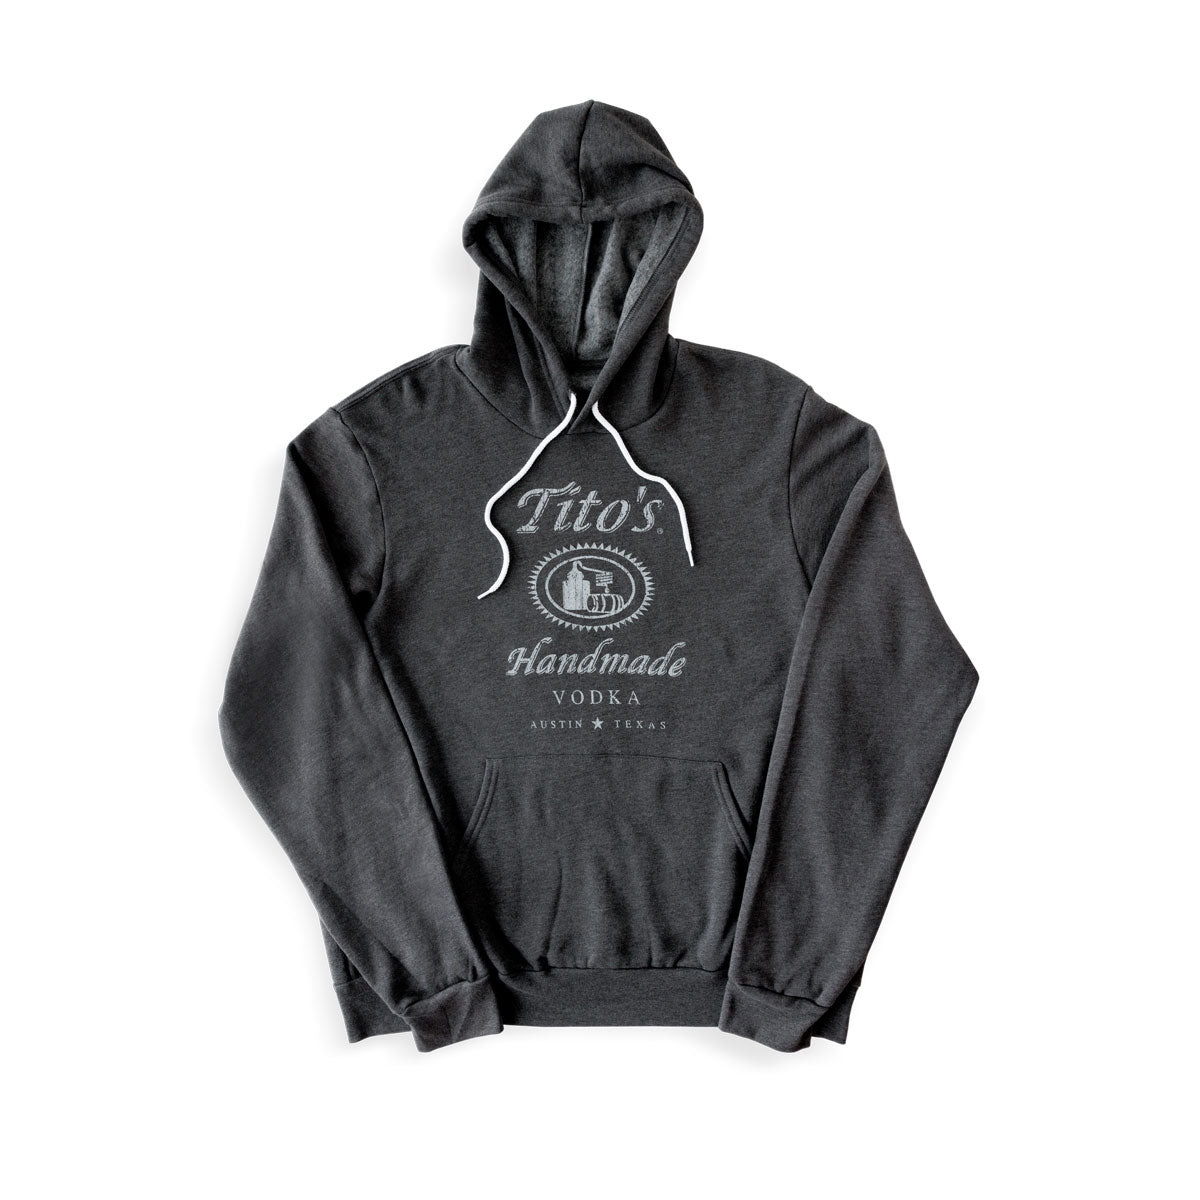 Front of charcoal gray hooded sweatshirt with white drawstring and white Tito's Handmade Vodka logo